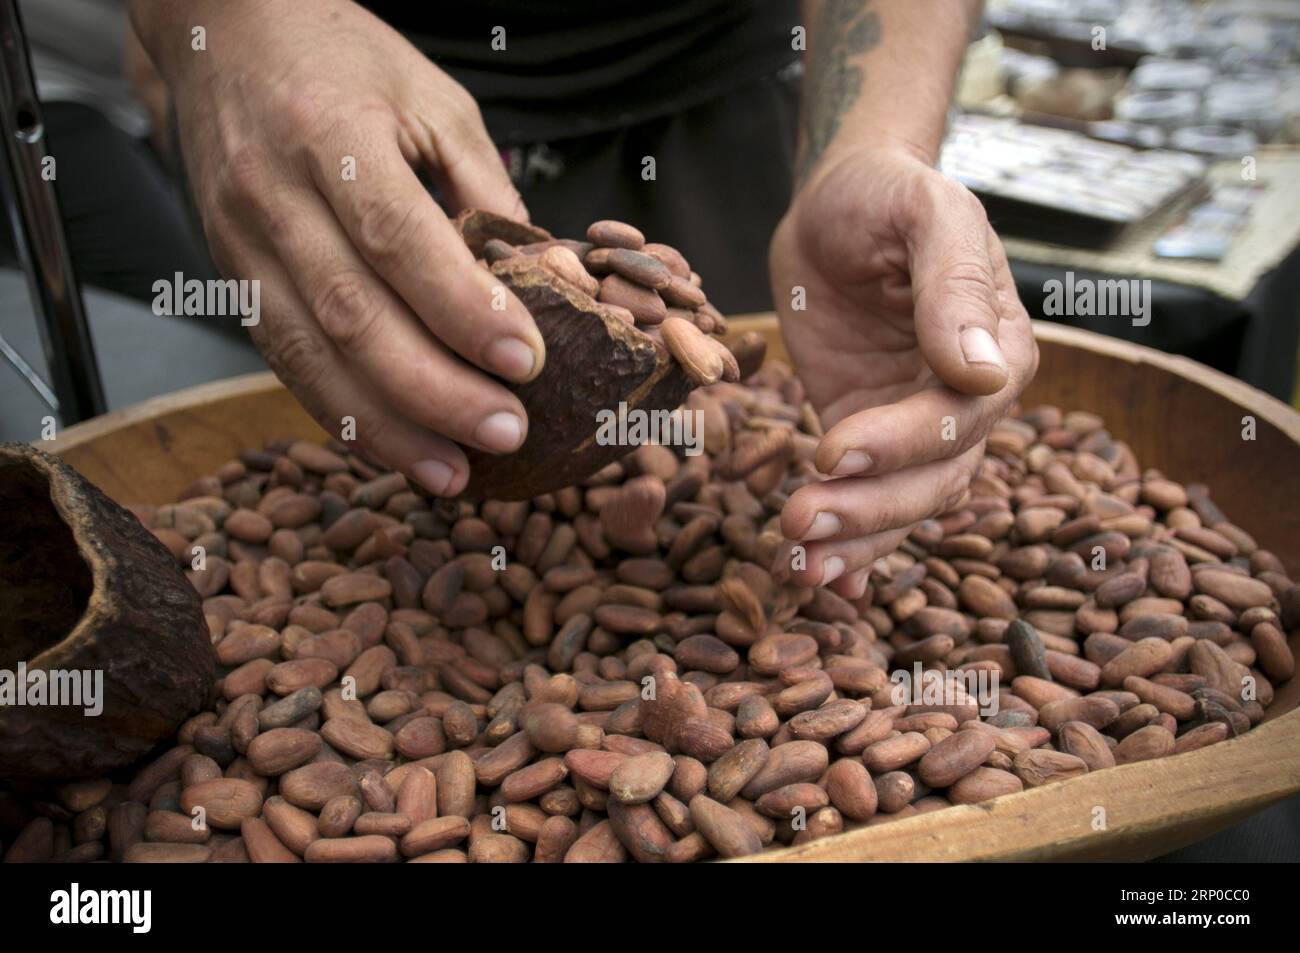 (180505) -- MEXICO CITY, May 5, 2018 -- Photo taken on May 4, 2018 shows a person displaying cocoa during the 2018 Chocolate and Cocoa Artisan Festival, in Mexico City, capital of Mexico. ) (jg) (rtg) (wtc) MEXICO-MEXICO CITY-CHOCOLATE AND COCOA FESTIVAL AlejandroxAyala PUBLICATIONxNOTxINxCHN Stock Photo